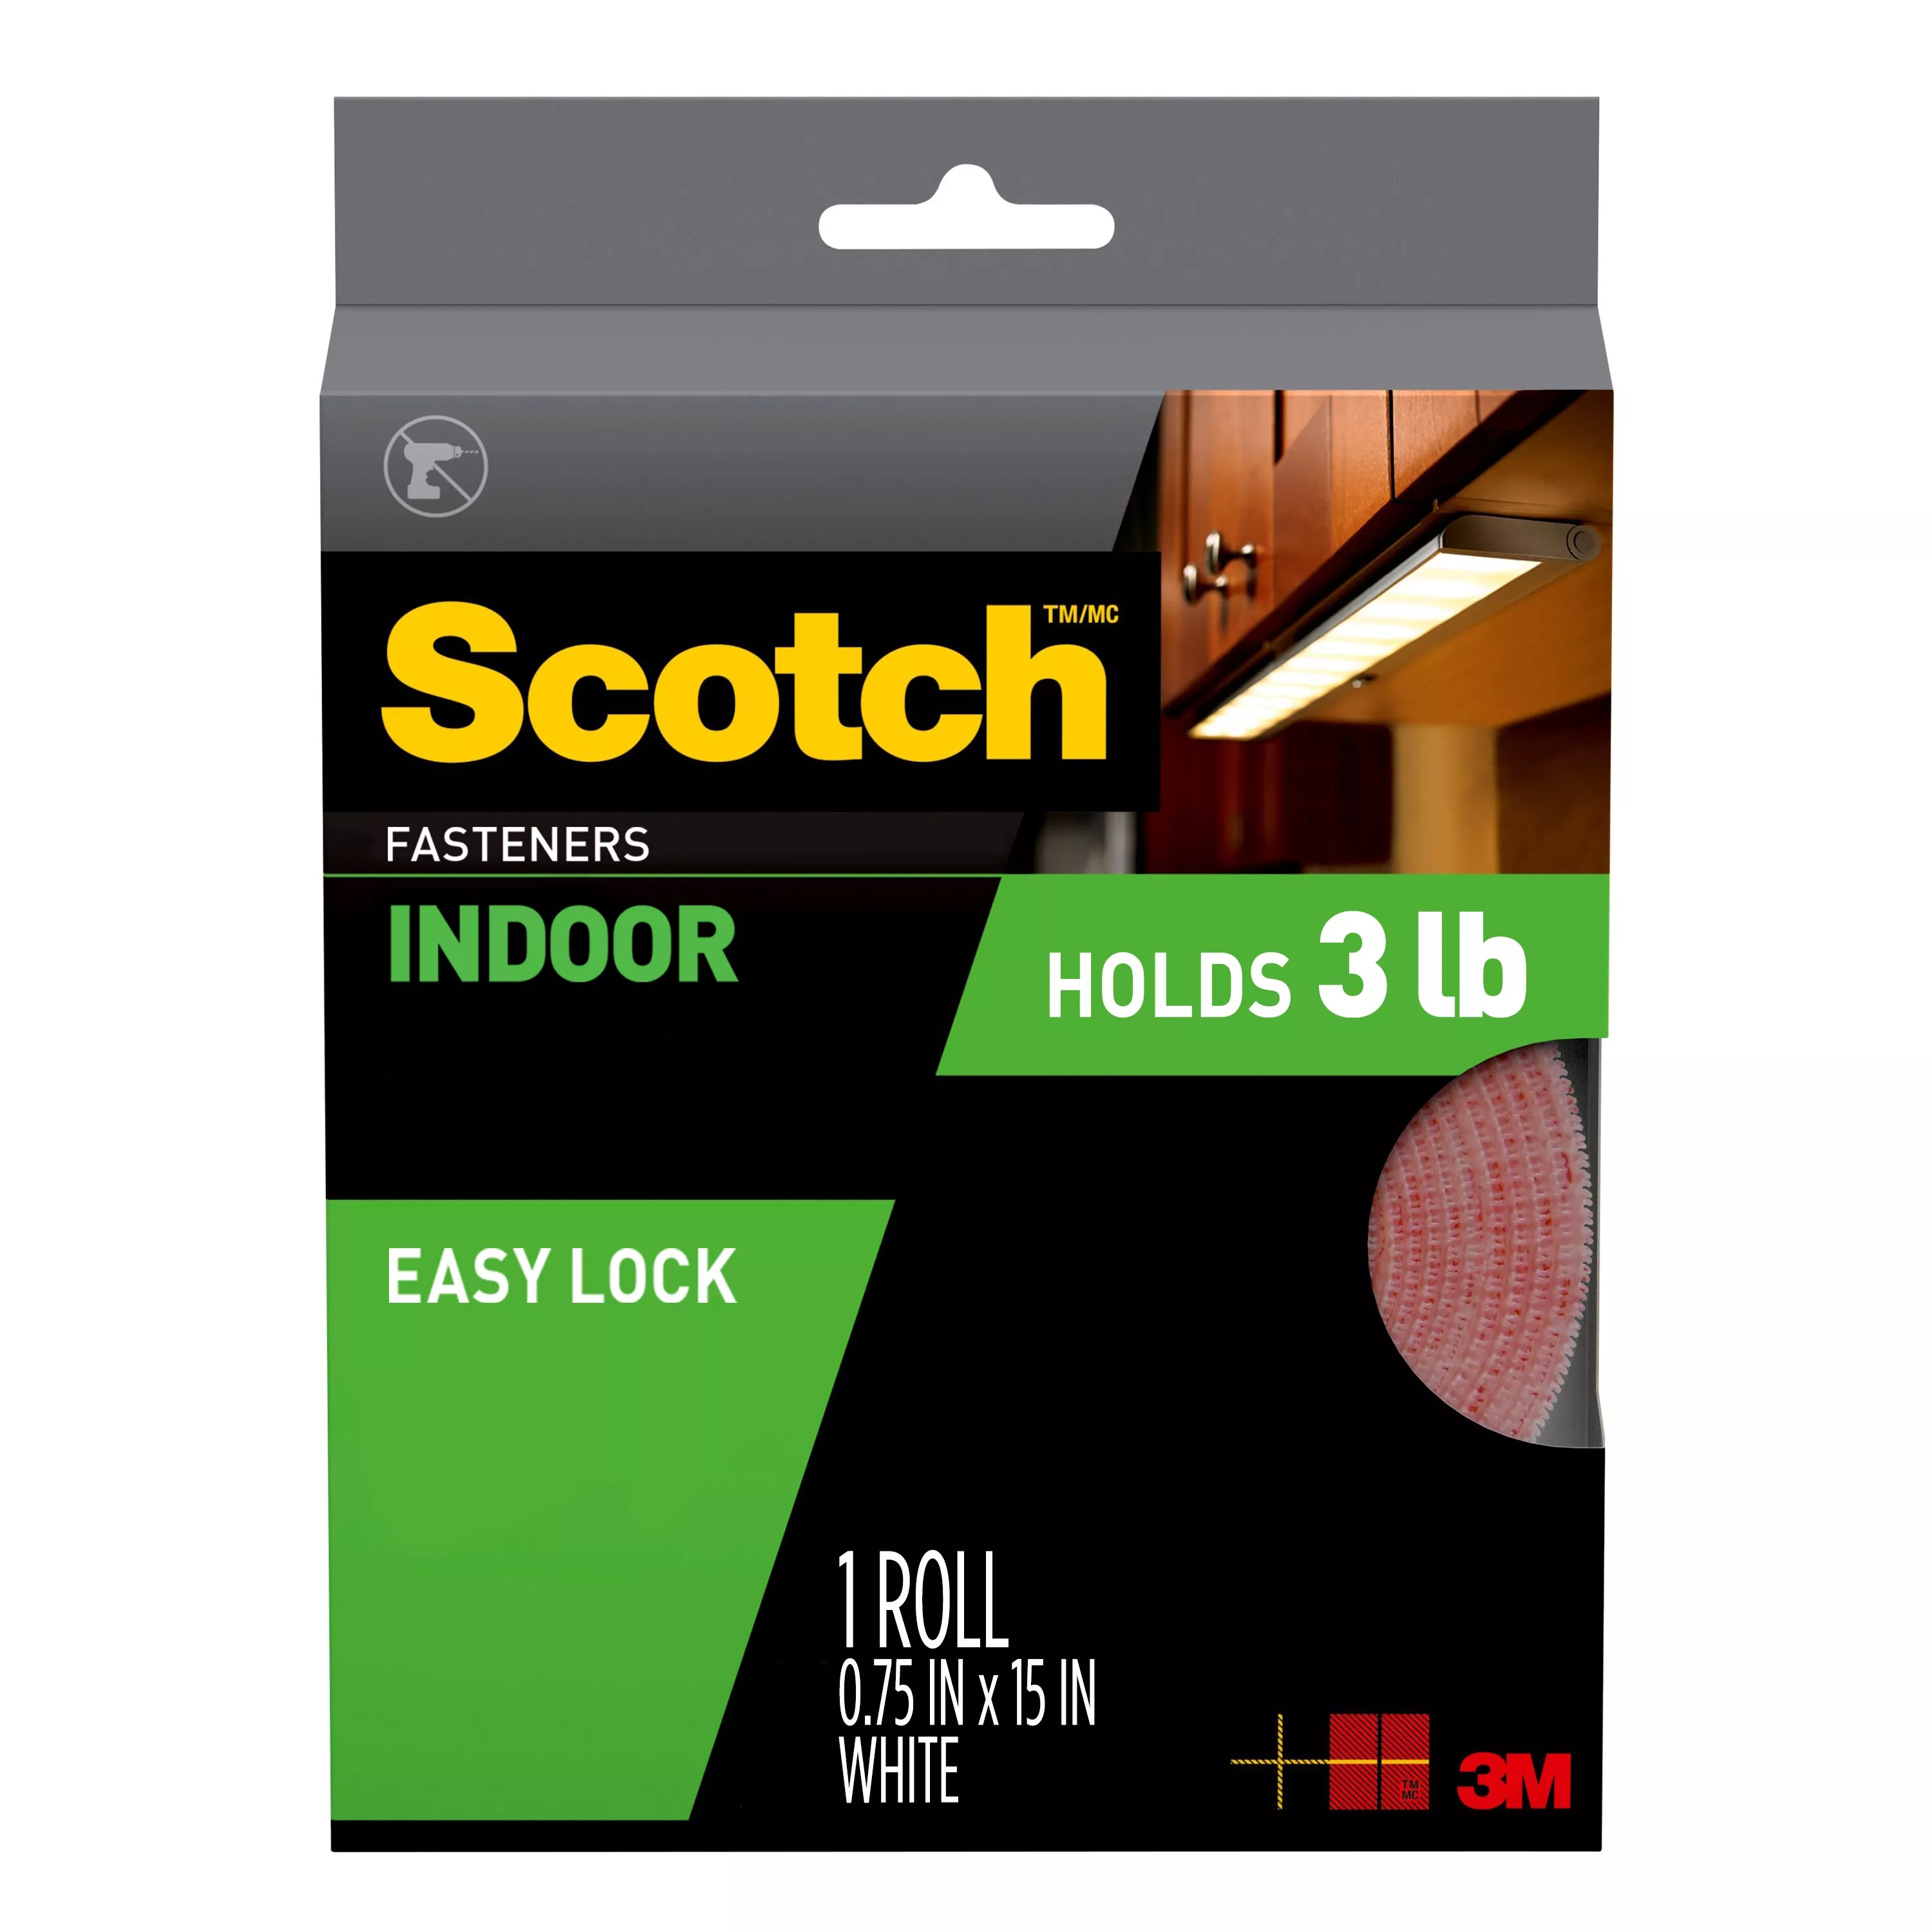 Scotch™ Indoor Fasteners RF4760, 3/4 in x 15 ft (19,0 mm x 4,57 m) White
1 Set of Strips